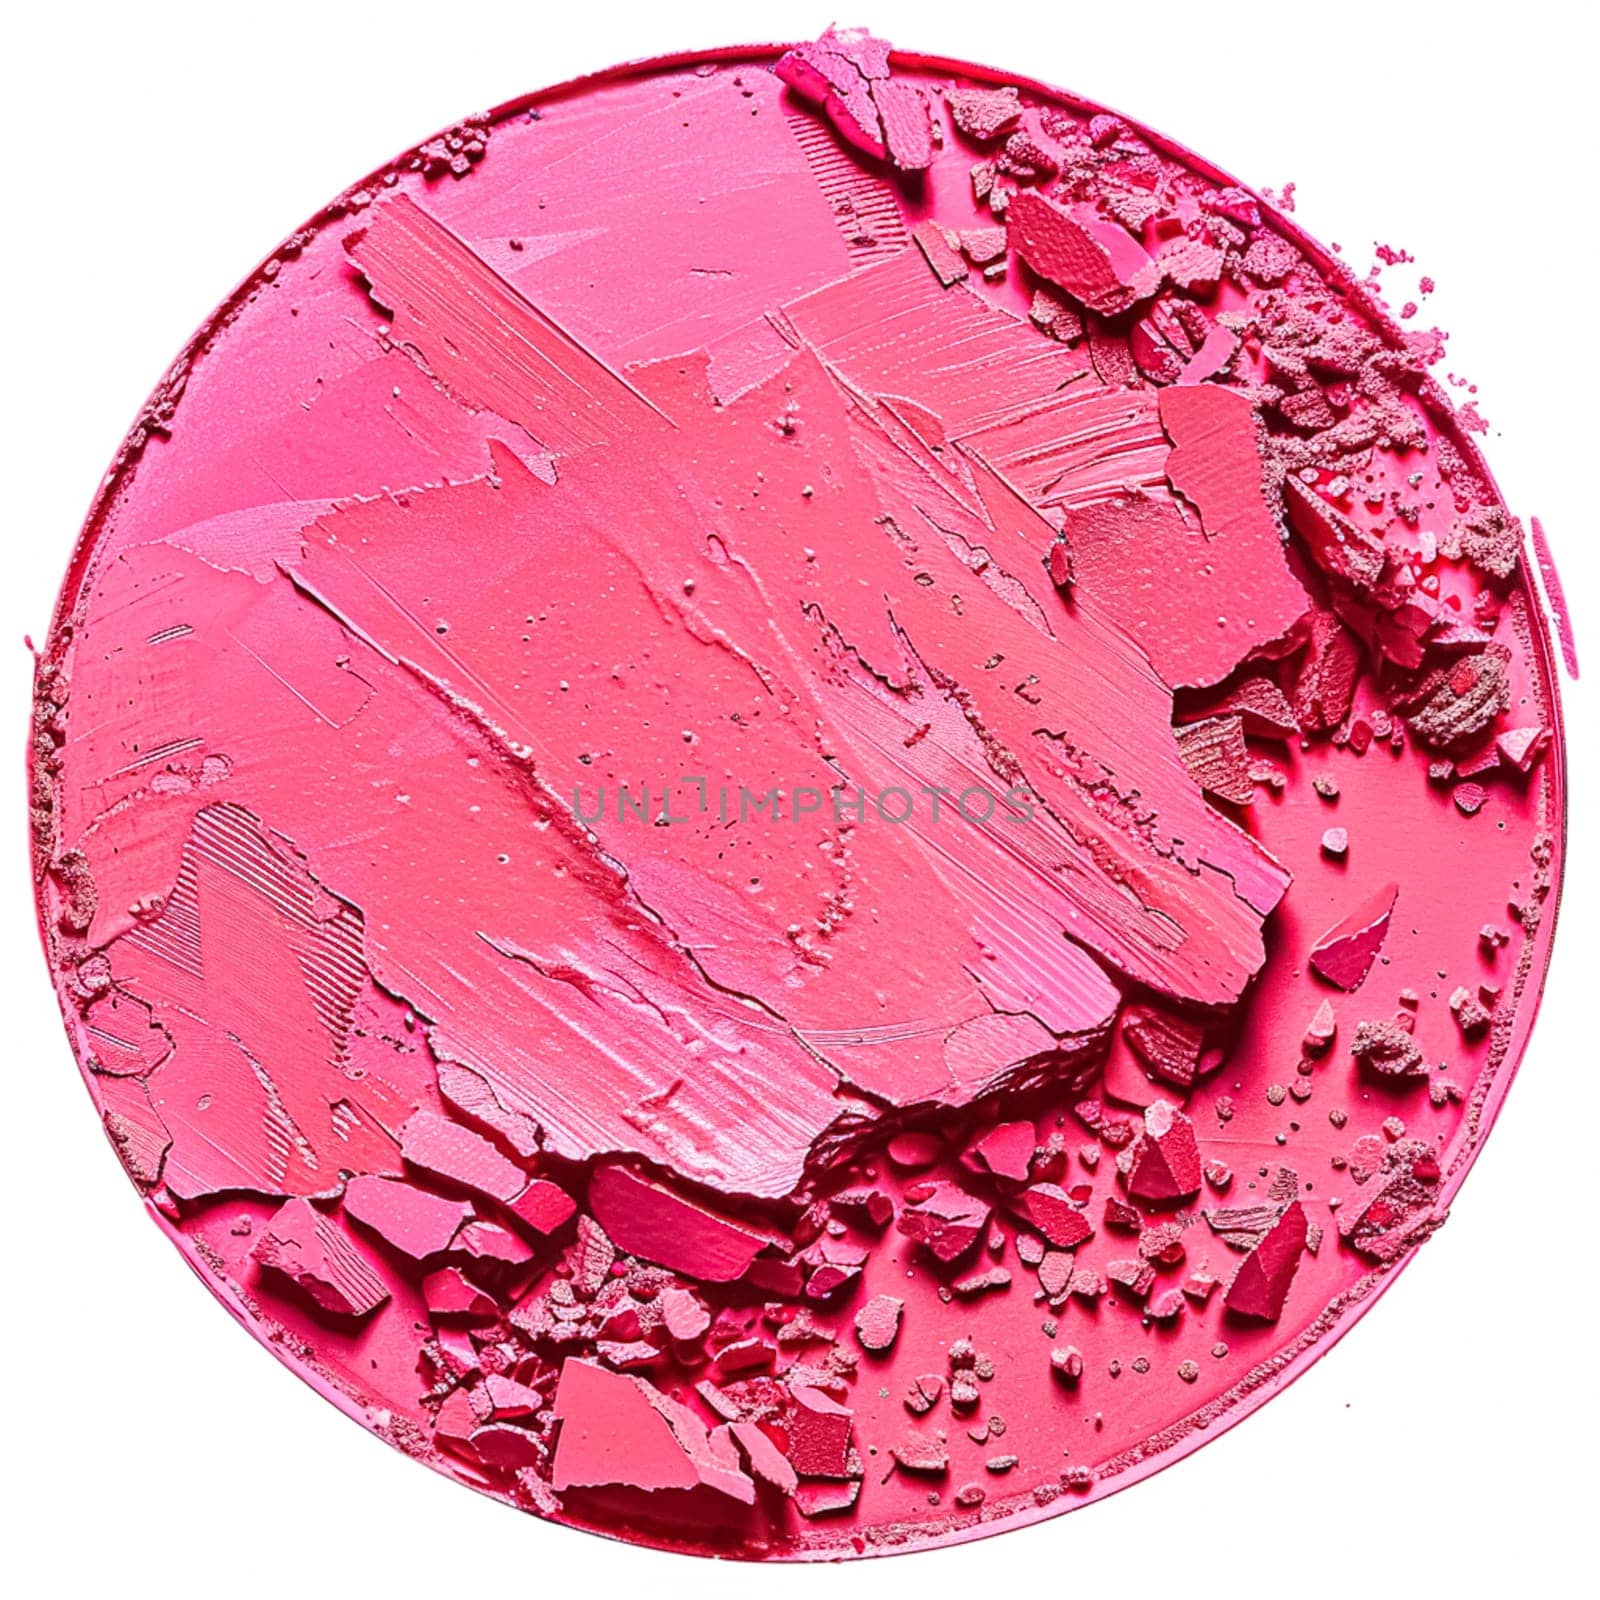 Beauty product and cosmetics texture as circle shape design, makeup blush eyeshadow powder as abstract luxury cosmetic background by Anneleven